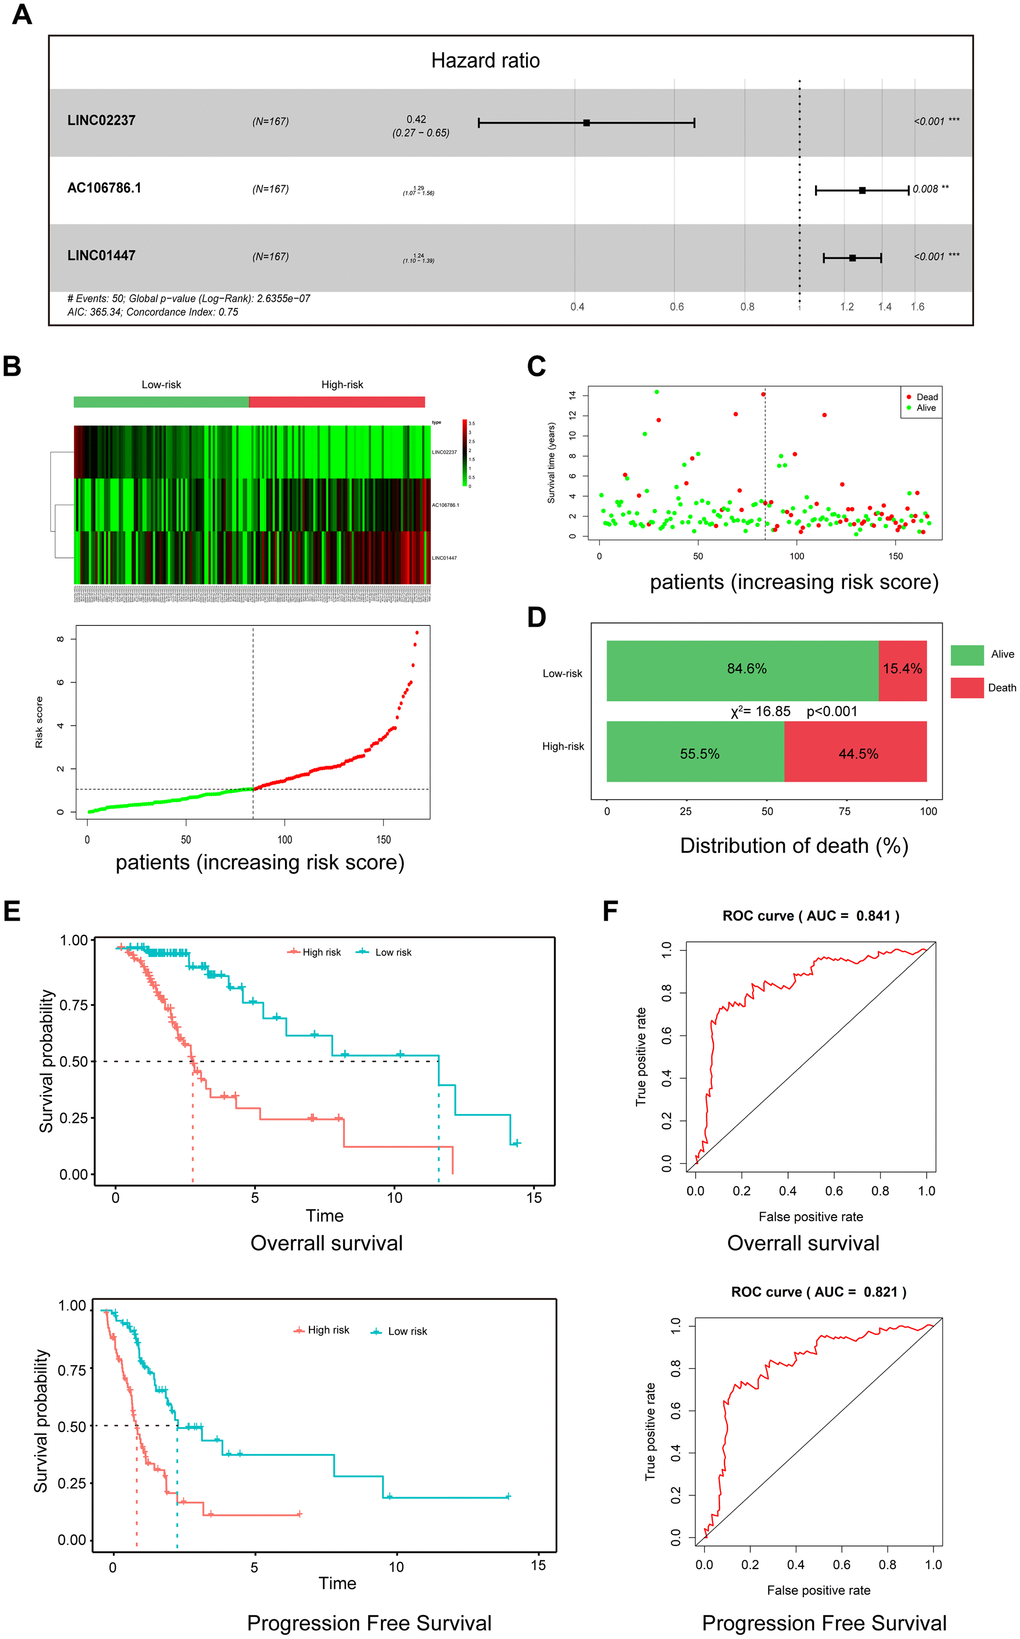 A three-lncRNA signature predicts LGG patient prognosis. (A) Construction of risk model by multivariate Cox regression; (B) Heatmap of seven lncRNA expression profiles and distribution of seven associated lncRNA-based risk scores; (C) Distributions showing patient status in high- and low-risk groups; (D) Mortality rates in high- and low-risk groups. (E) Survival curves of patients assigned to high- and low-risk groups; (F) ROC curves showing the predictive efficiency of the risk signature on survival.